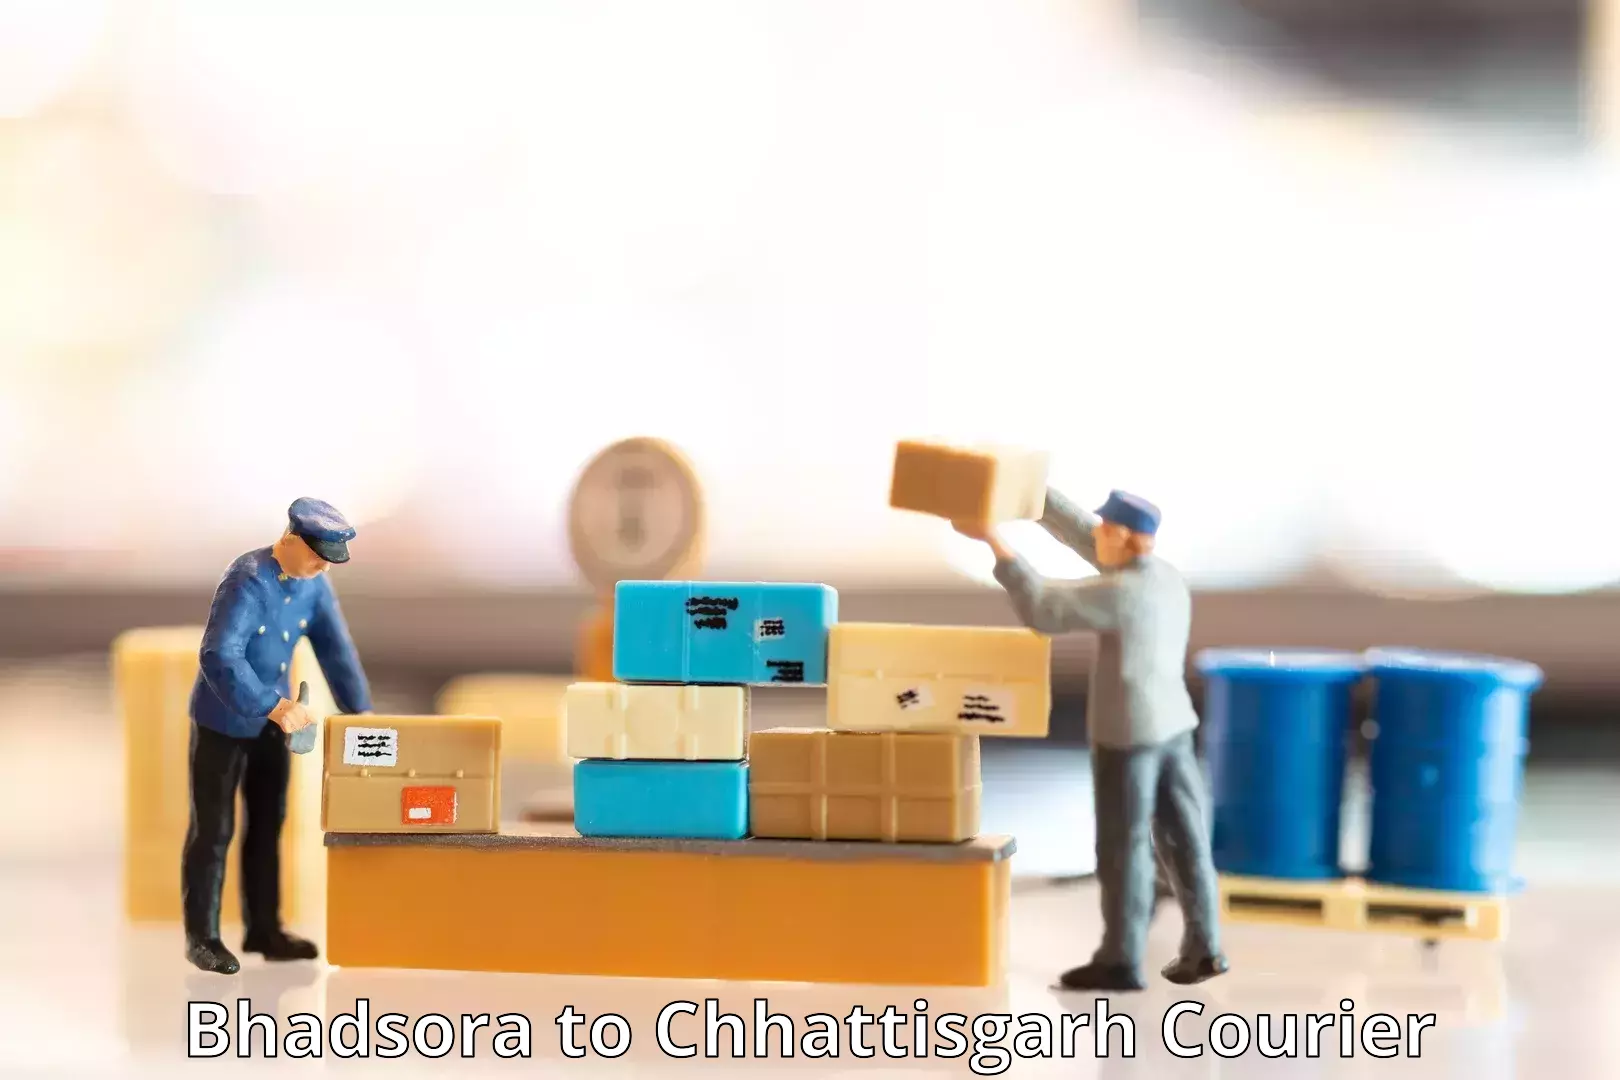 Modern delivery technologies Bhadsora to Amakhokhara